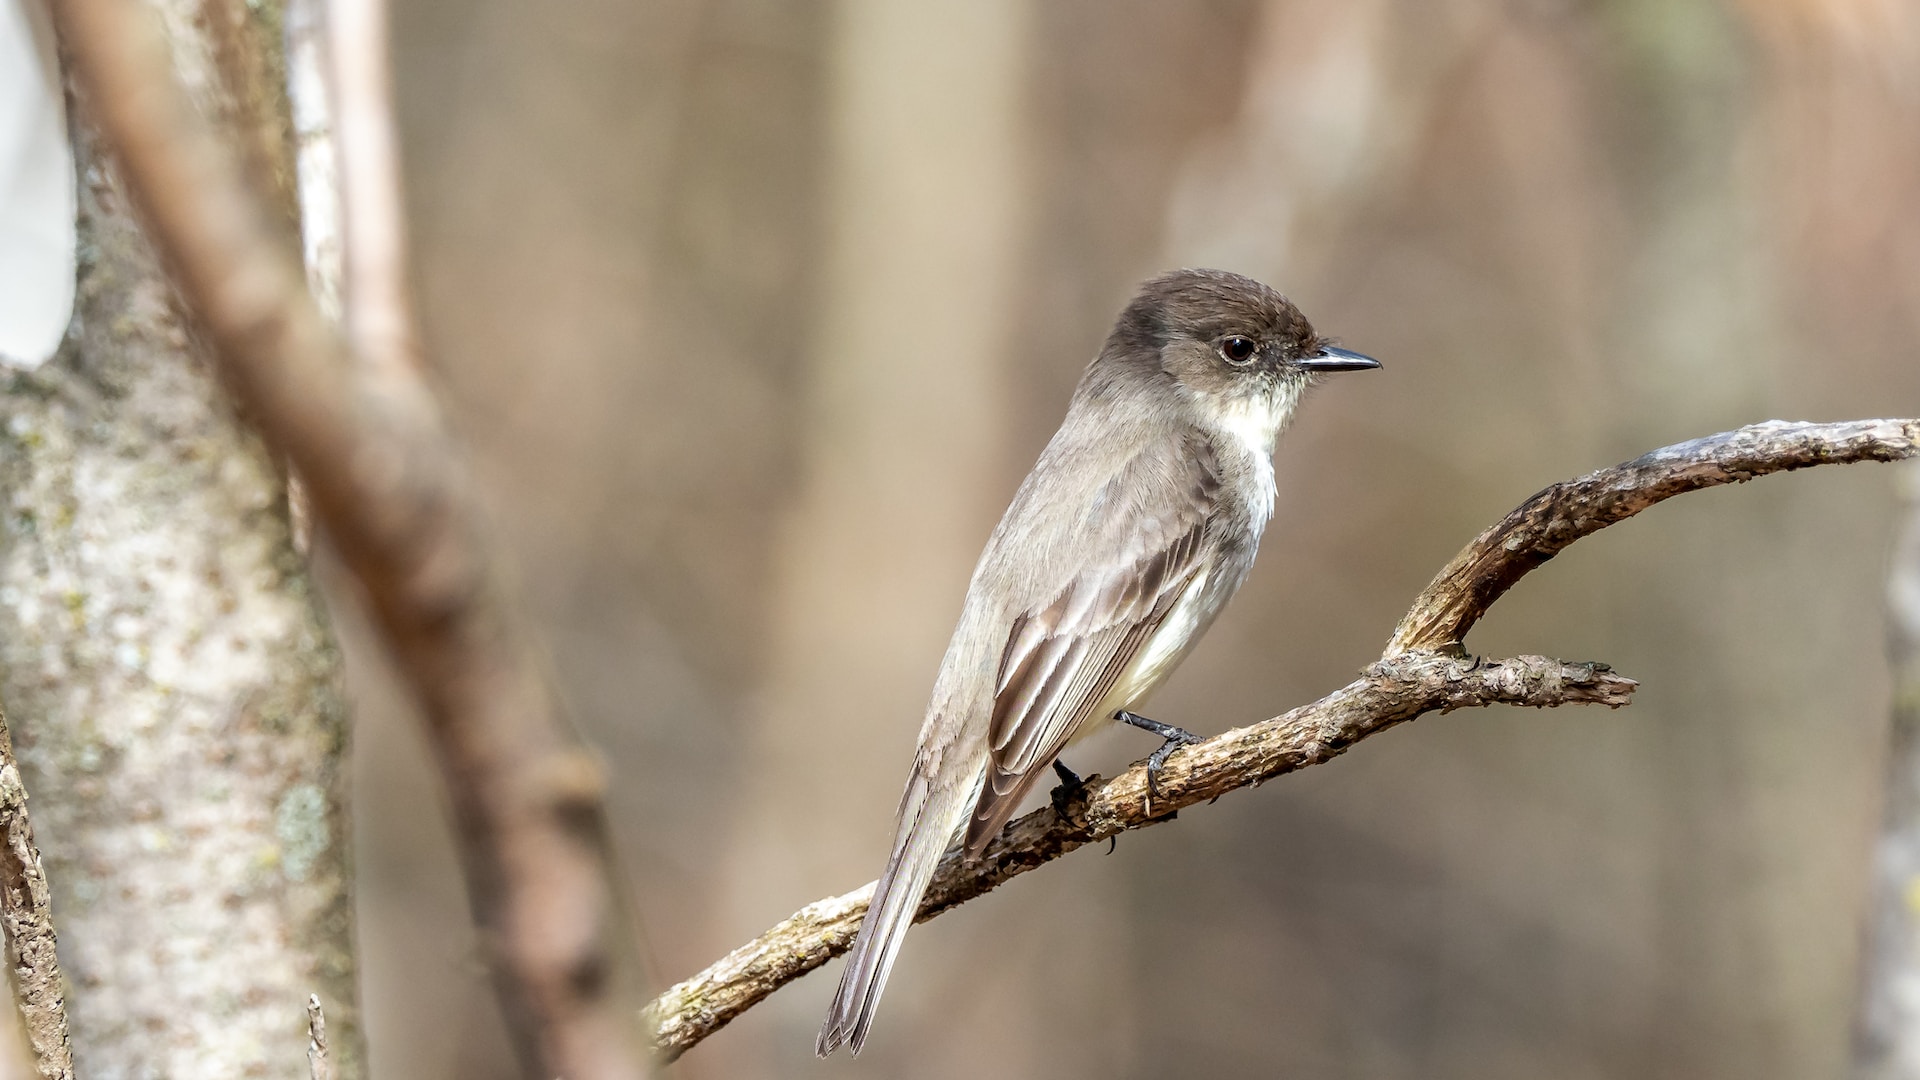 An eastern phoebe perched on a tree branch